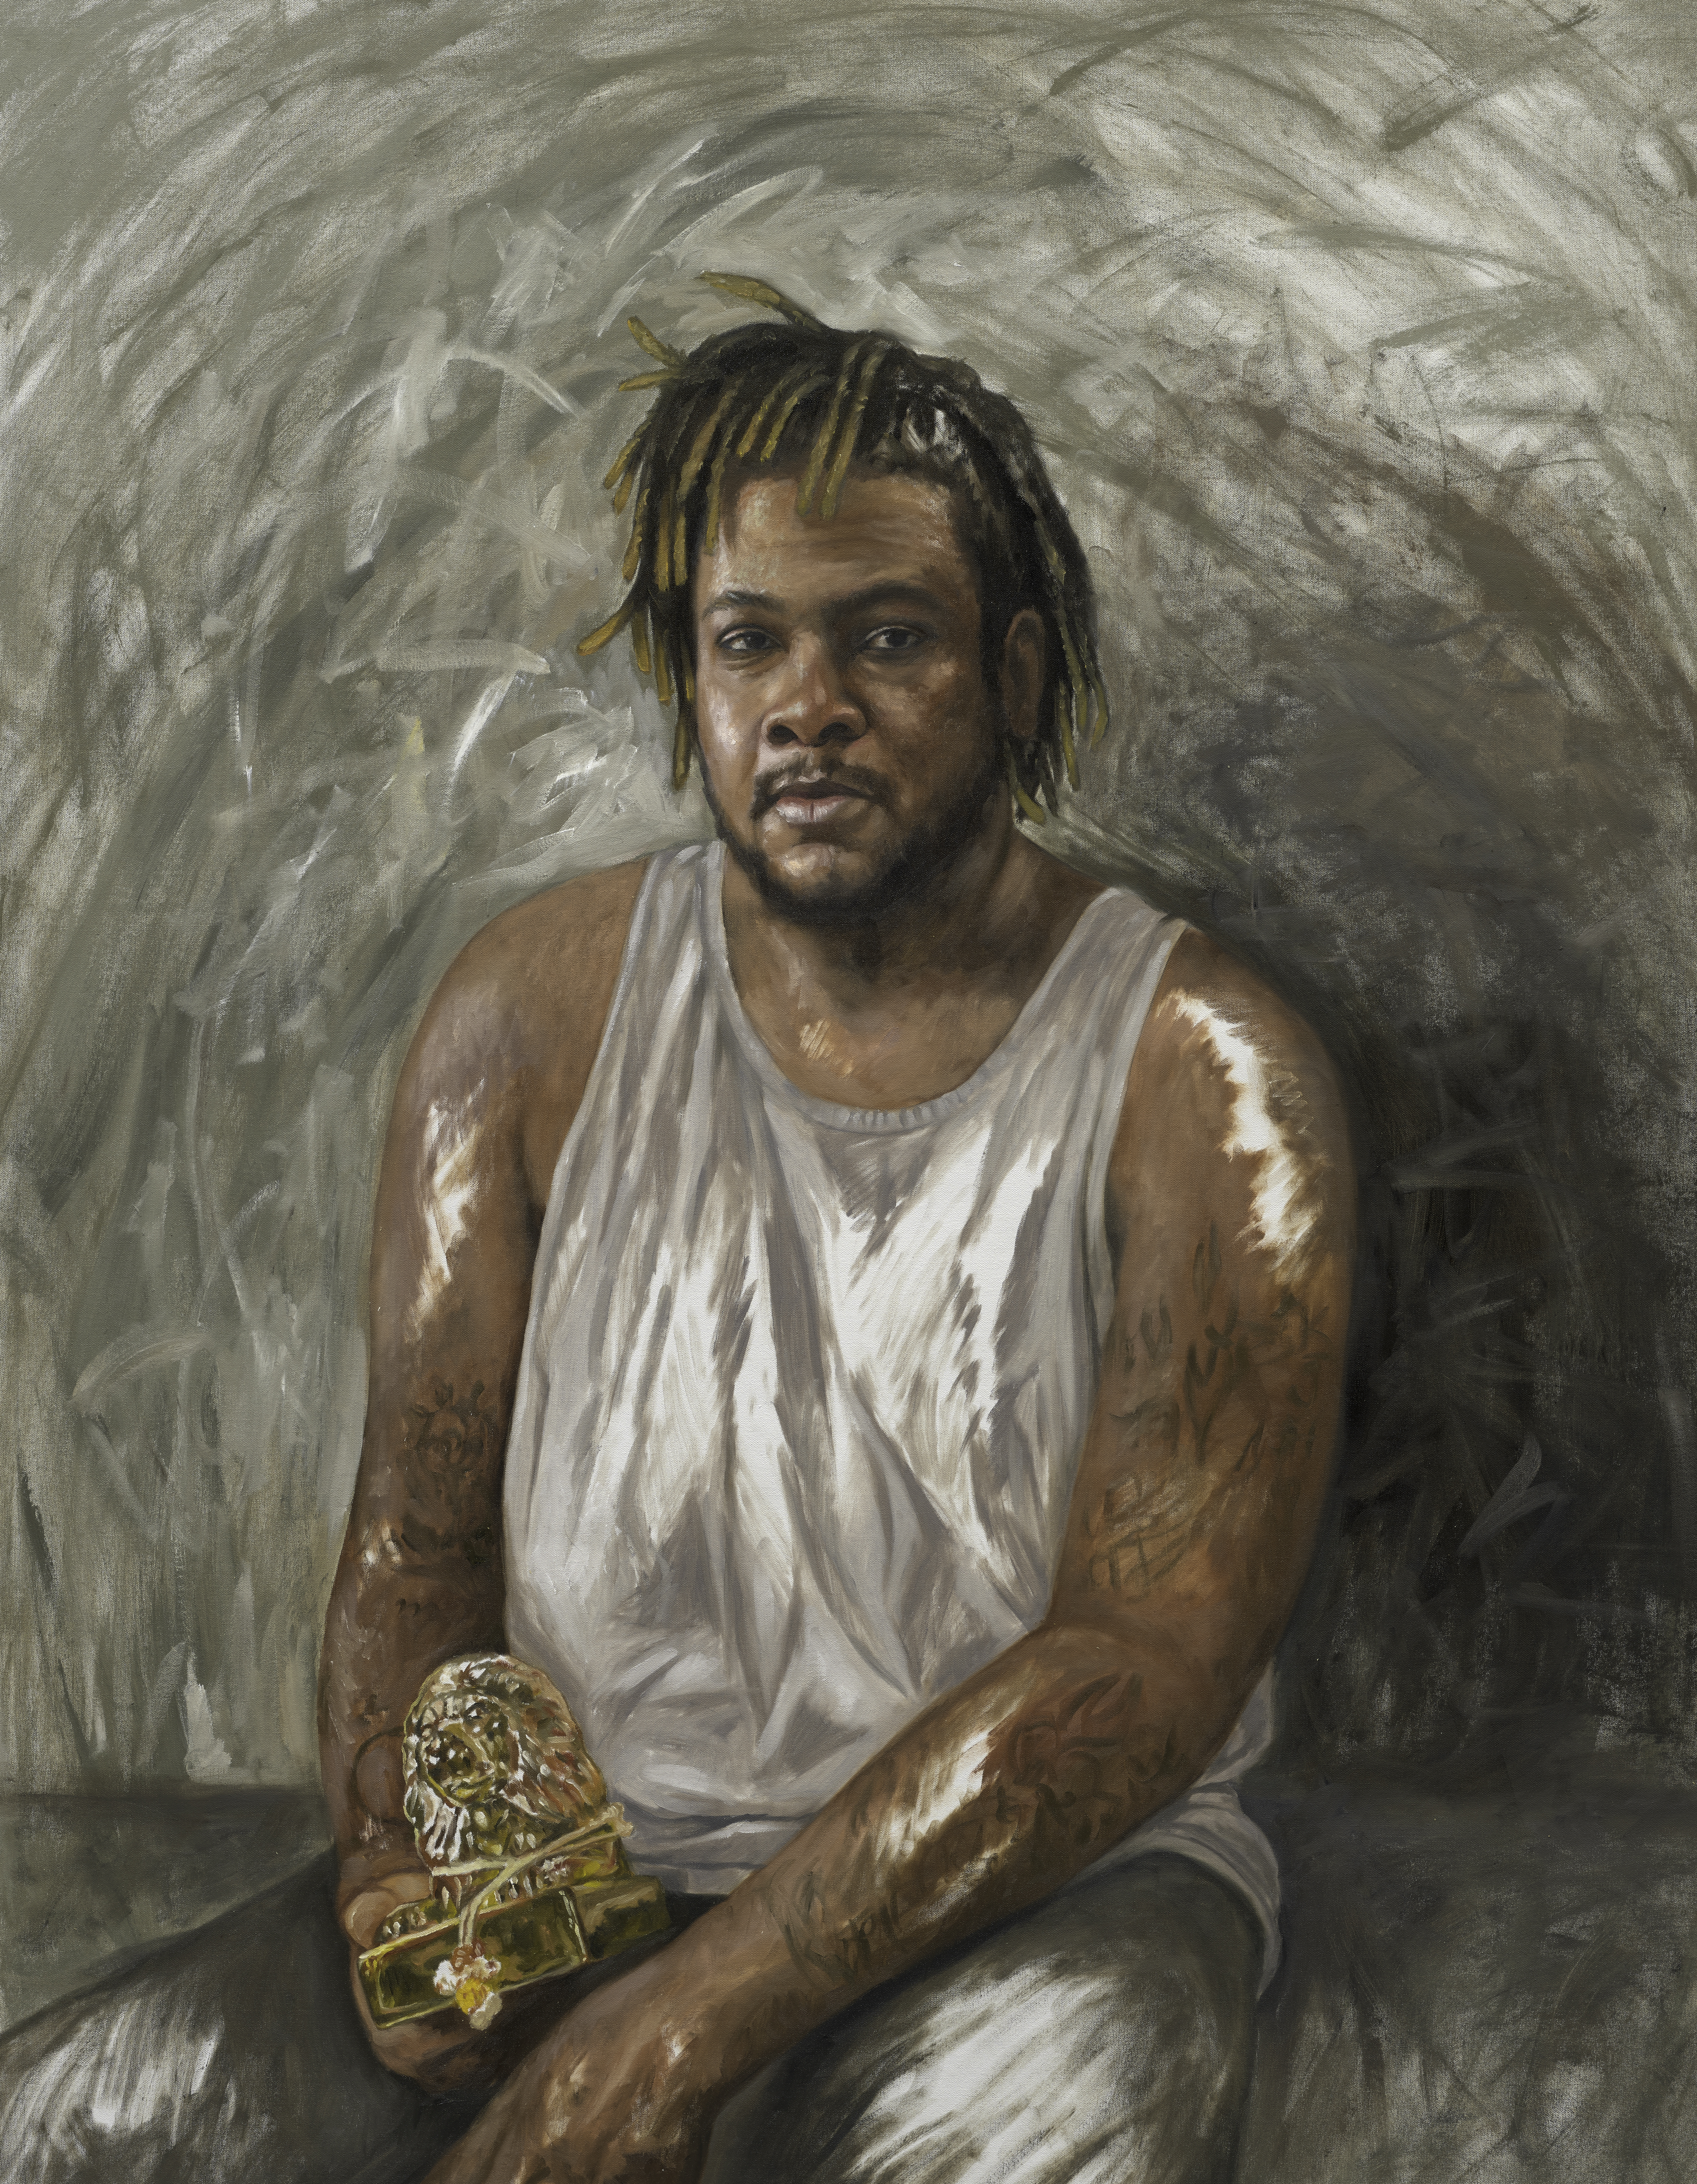 Oil painting of a man with a dark skin tone, dark hair and beard, wearing a white tank top, holding a small gold statue of a lion 